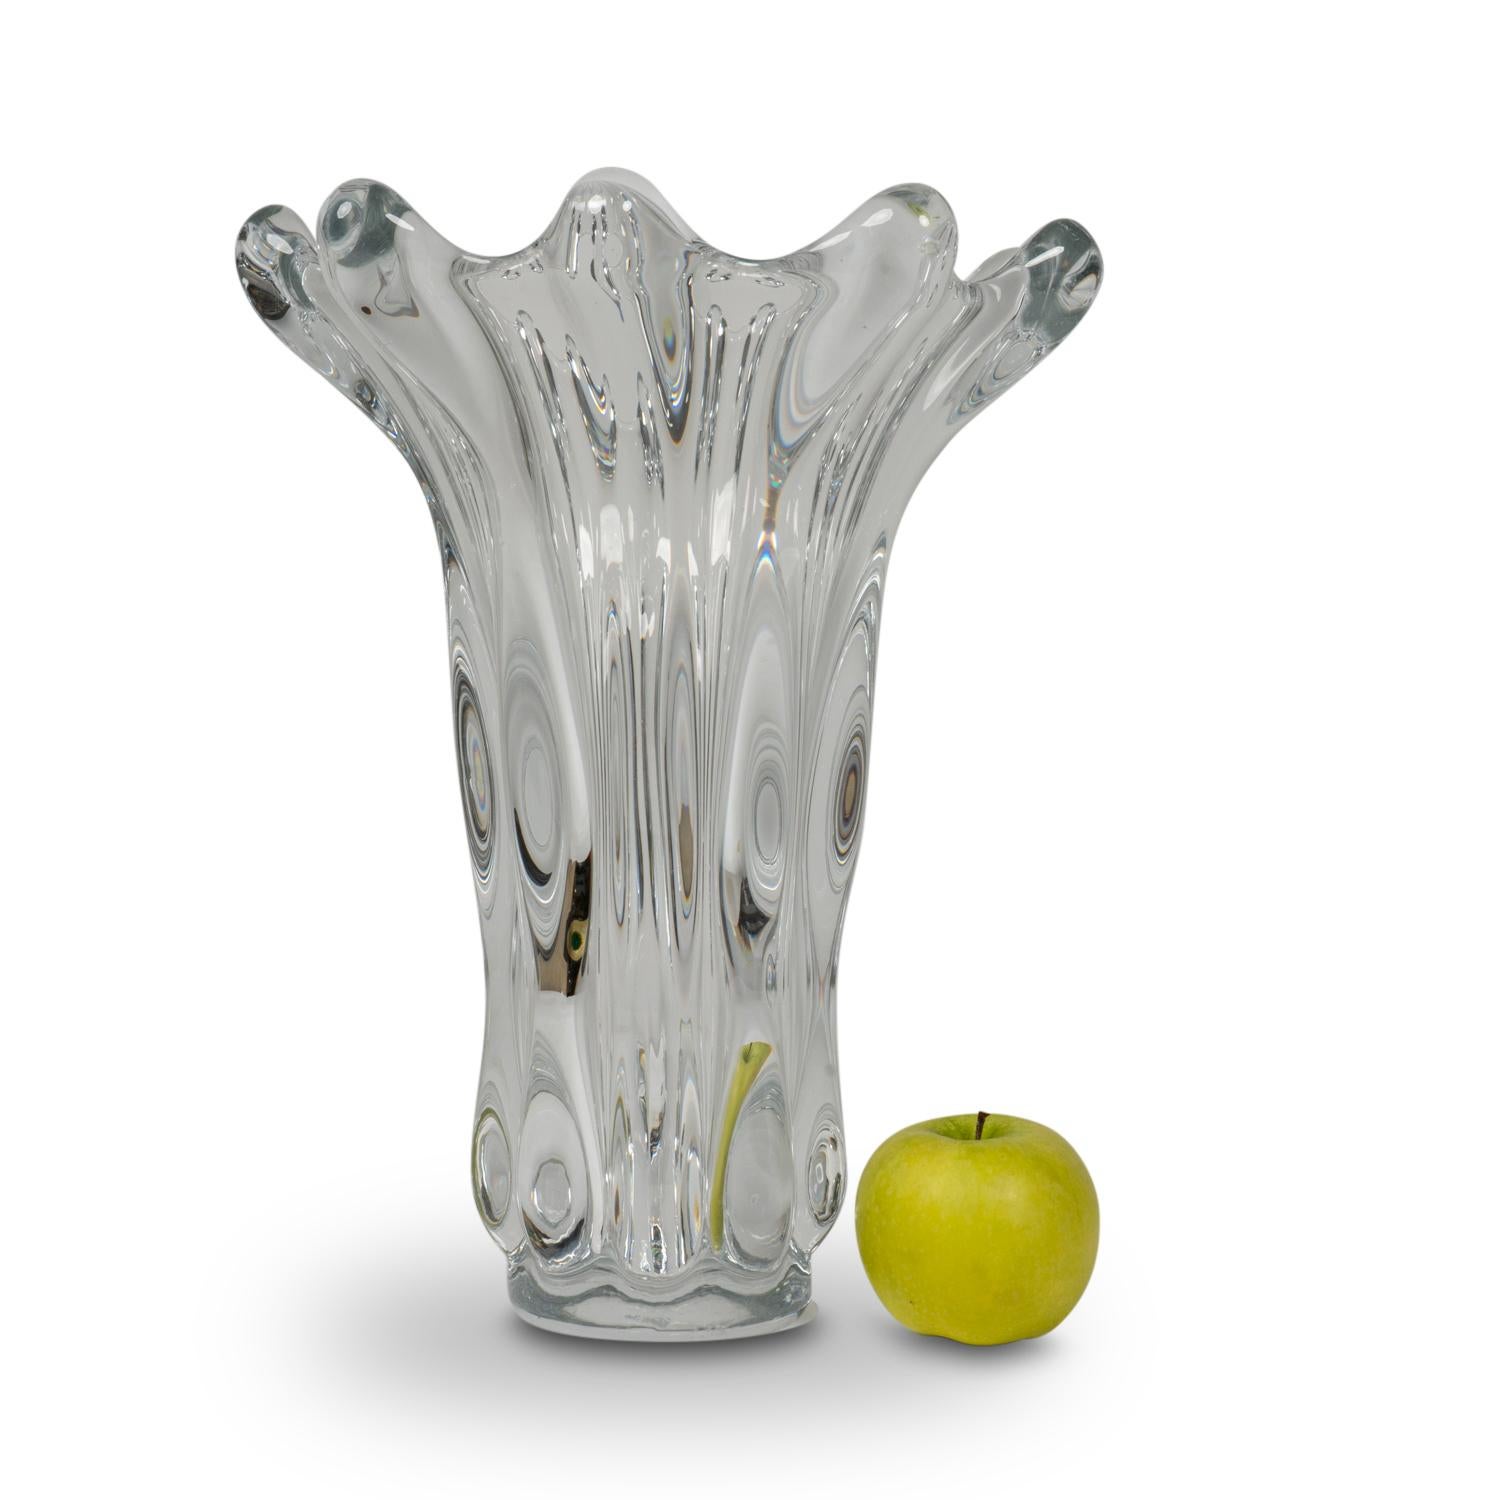 Art Vannes, signed. 
Crystal vase, hand blown, corolla-shaped. Signed under the base. 
French work realized in the 1920s. 
